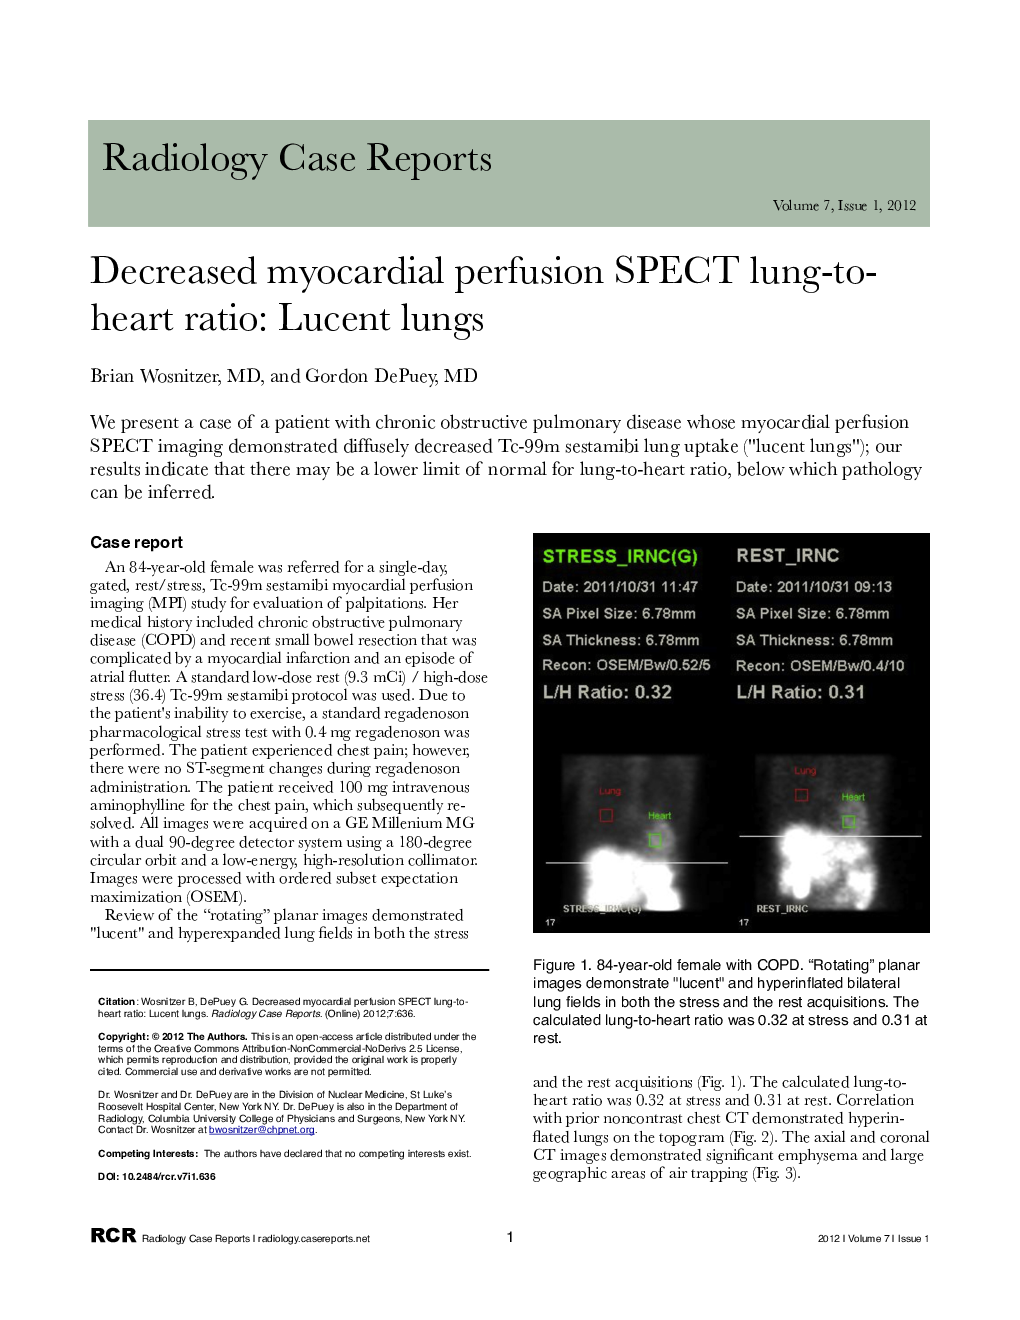 Decreased myocardial perfusion SPECT lung-to-heart ratio: Lucent lungs